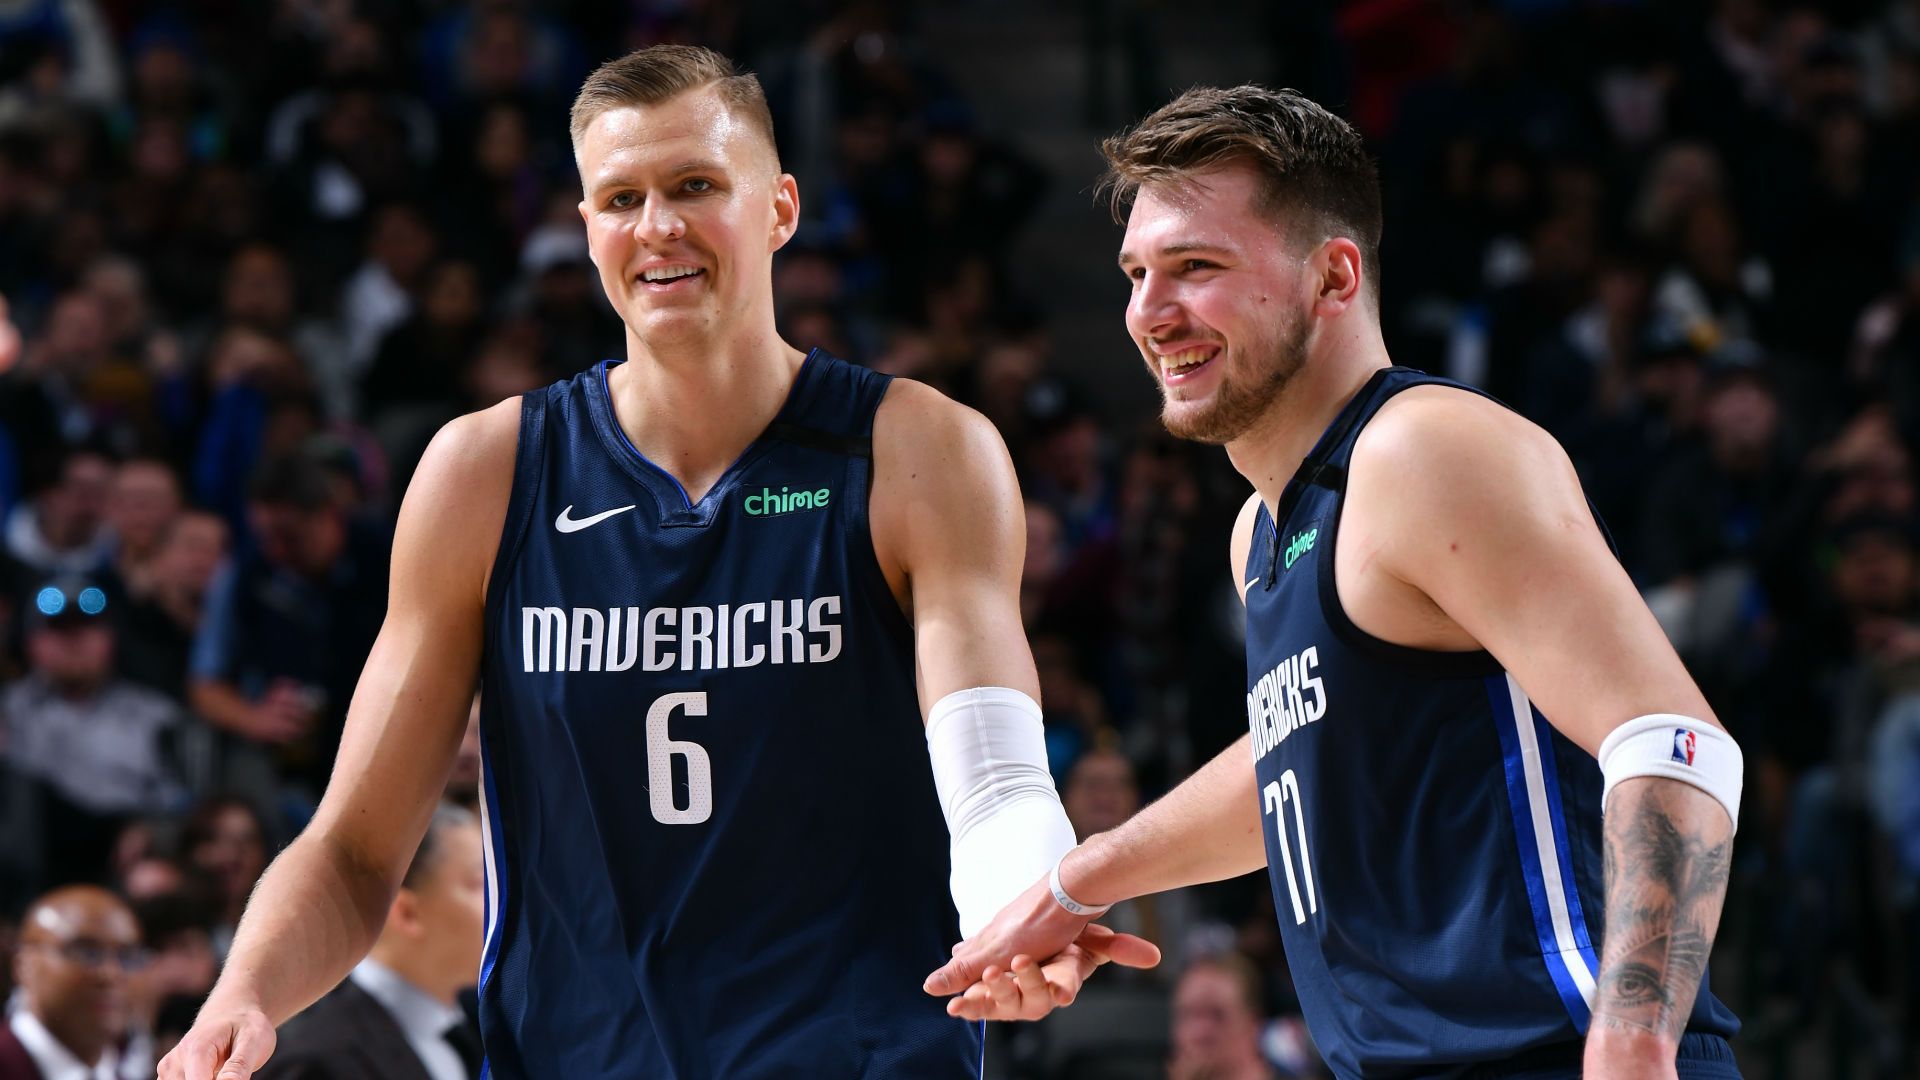 Luka Doncic and Kristaps Porzingis are forming a fearsome duo